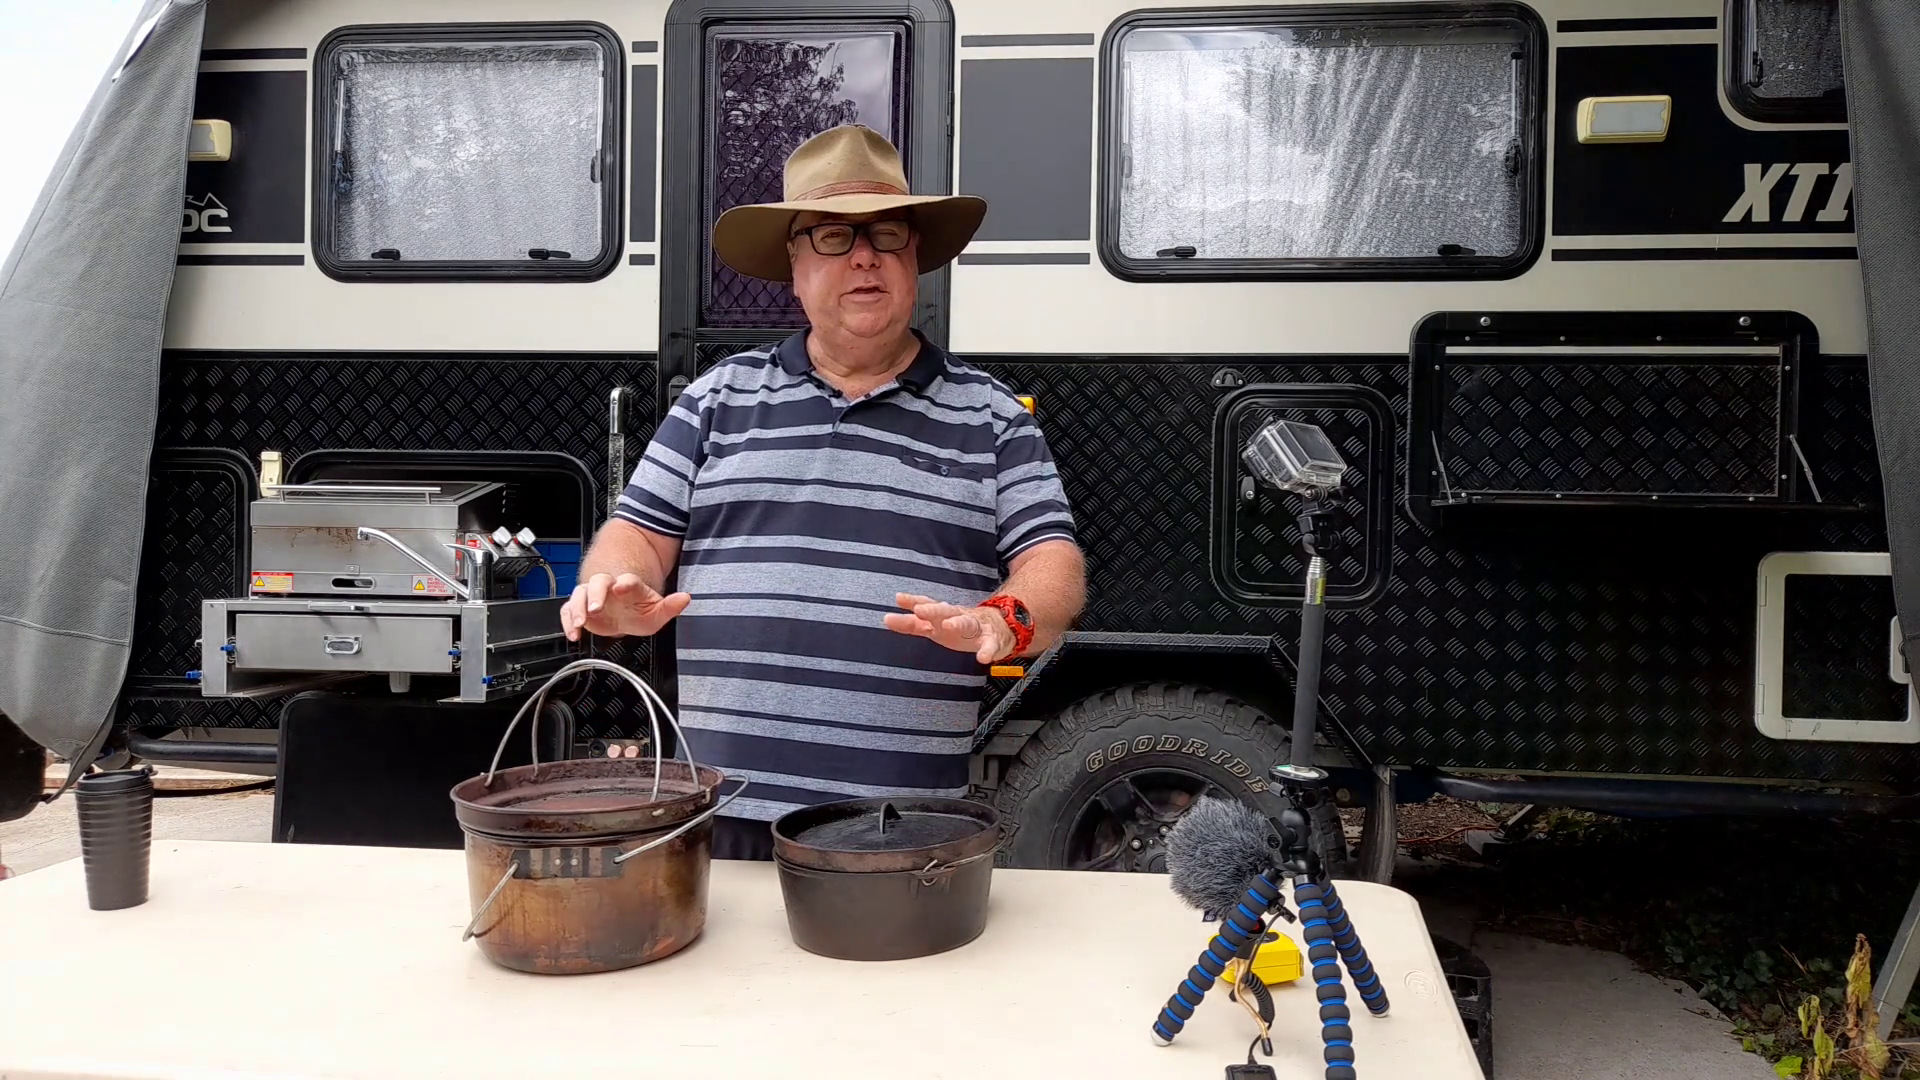 Video: How to Choose A Camp Oven